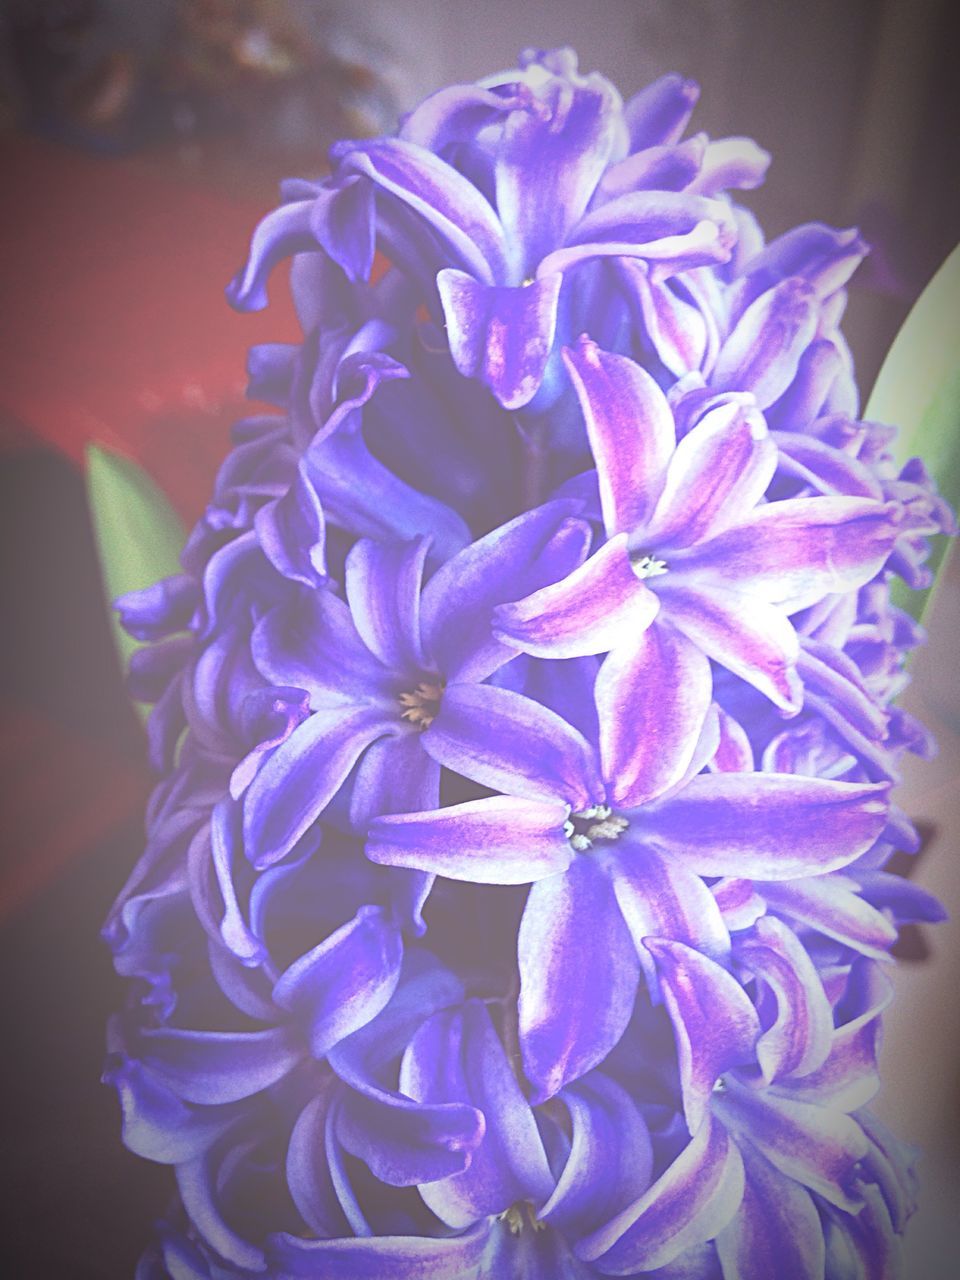 flower, petal, flower head, fragility, purple, freshness, close-up, focus on foreground, beauty in nature, indoors, growth, blooming, nature, plant, no people, in bloom, selective focus, bunch of flowers, single flower, blue